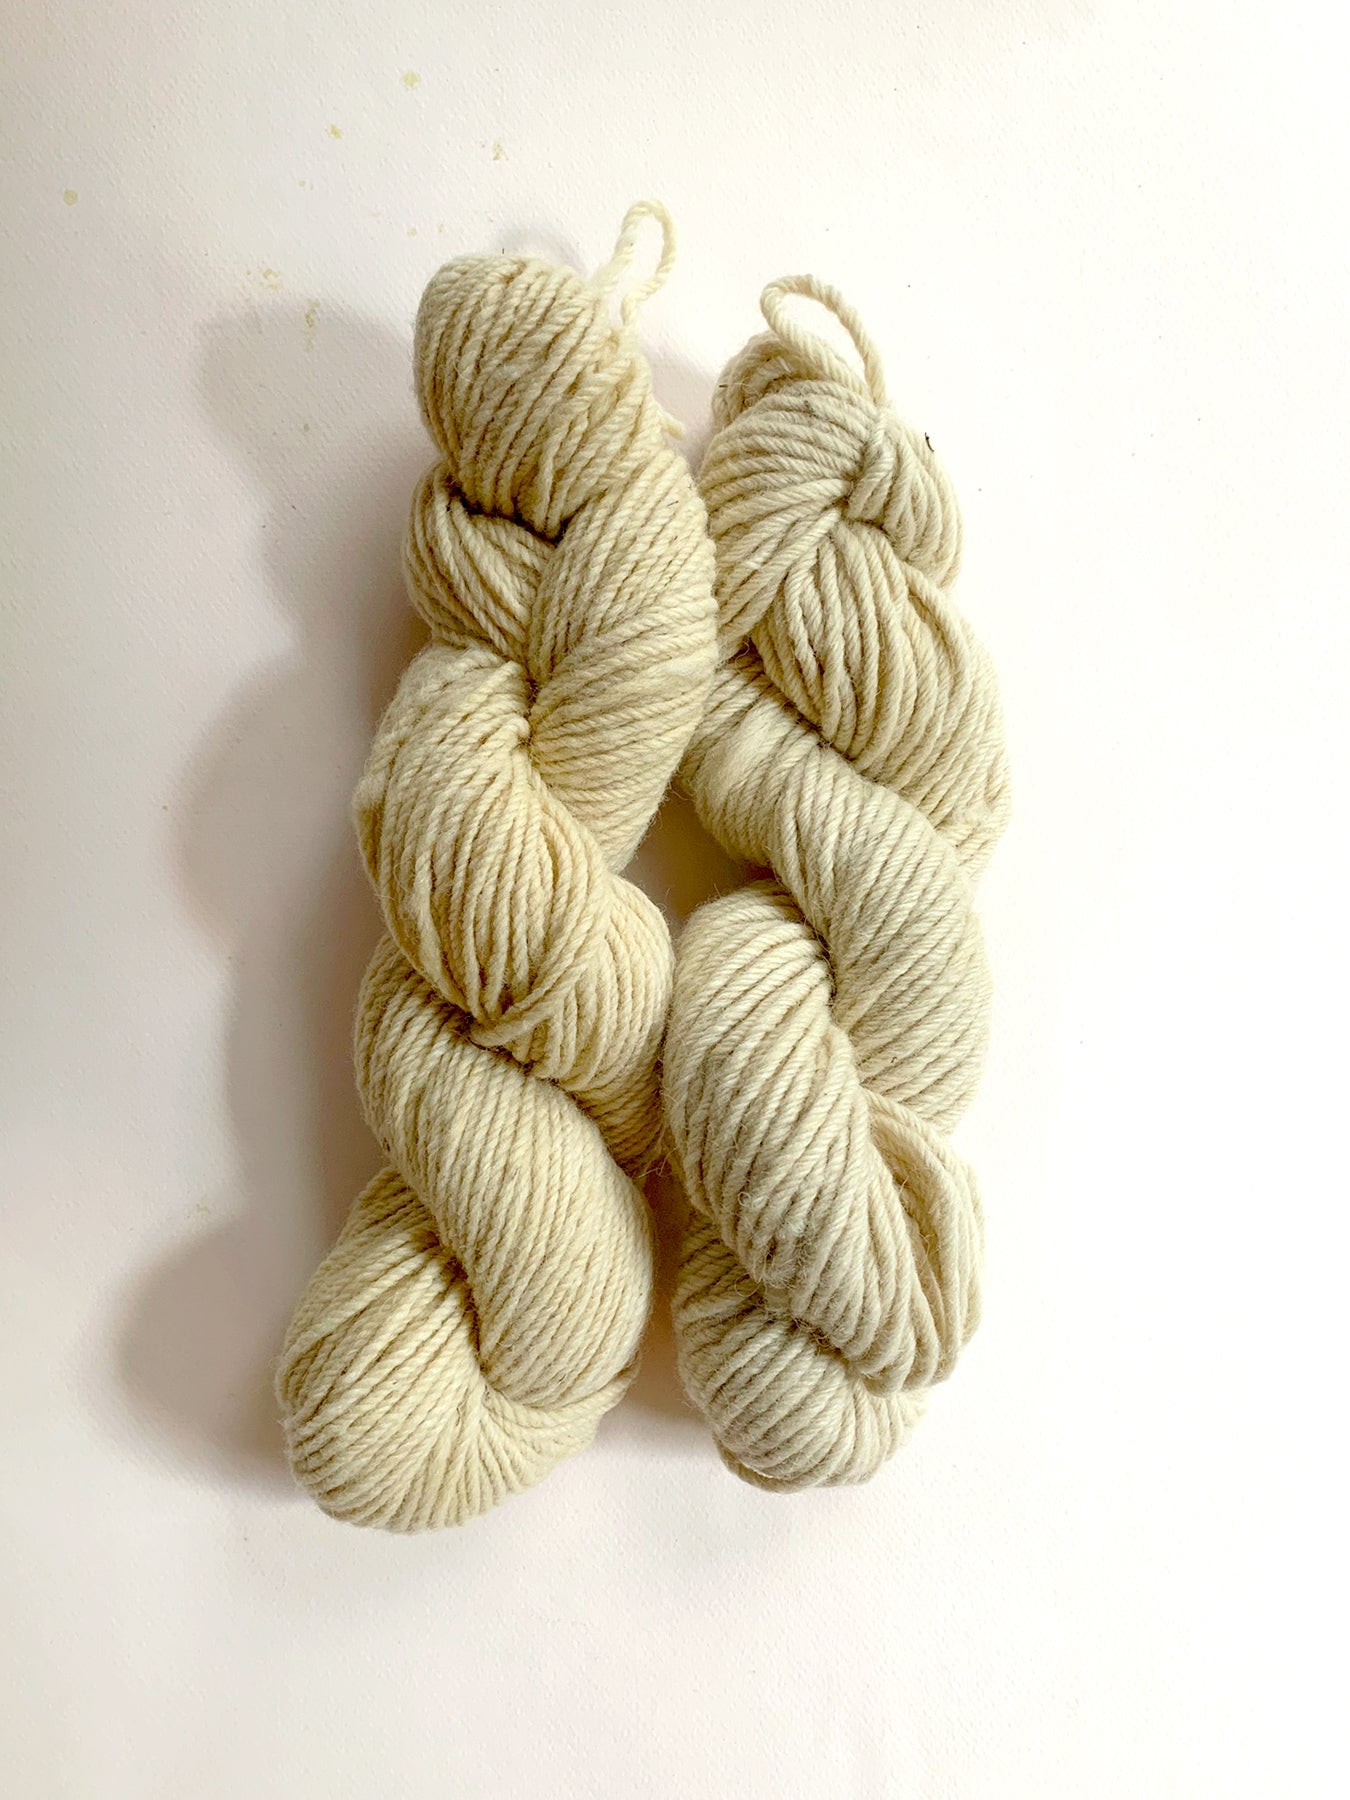 Herd Supply Co_Bulky and chunky weight yarn